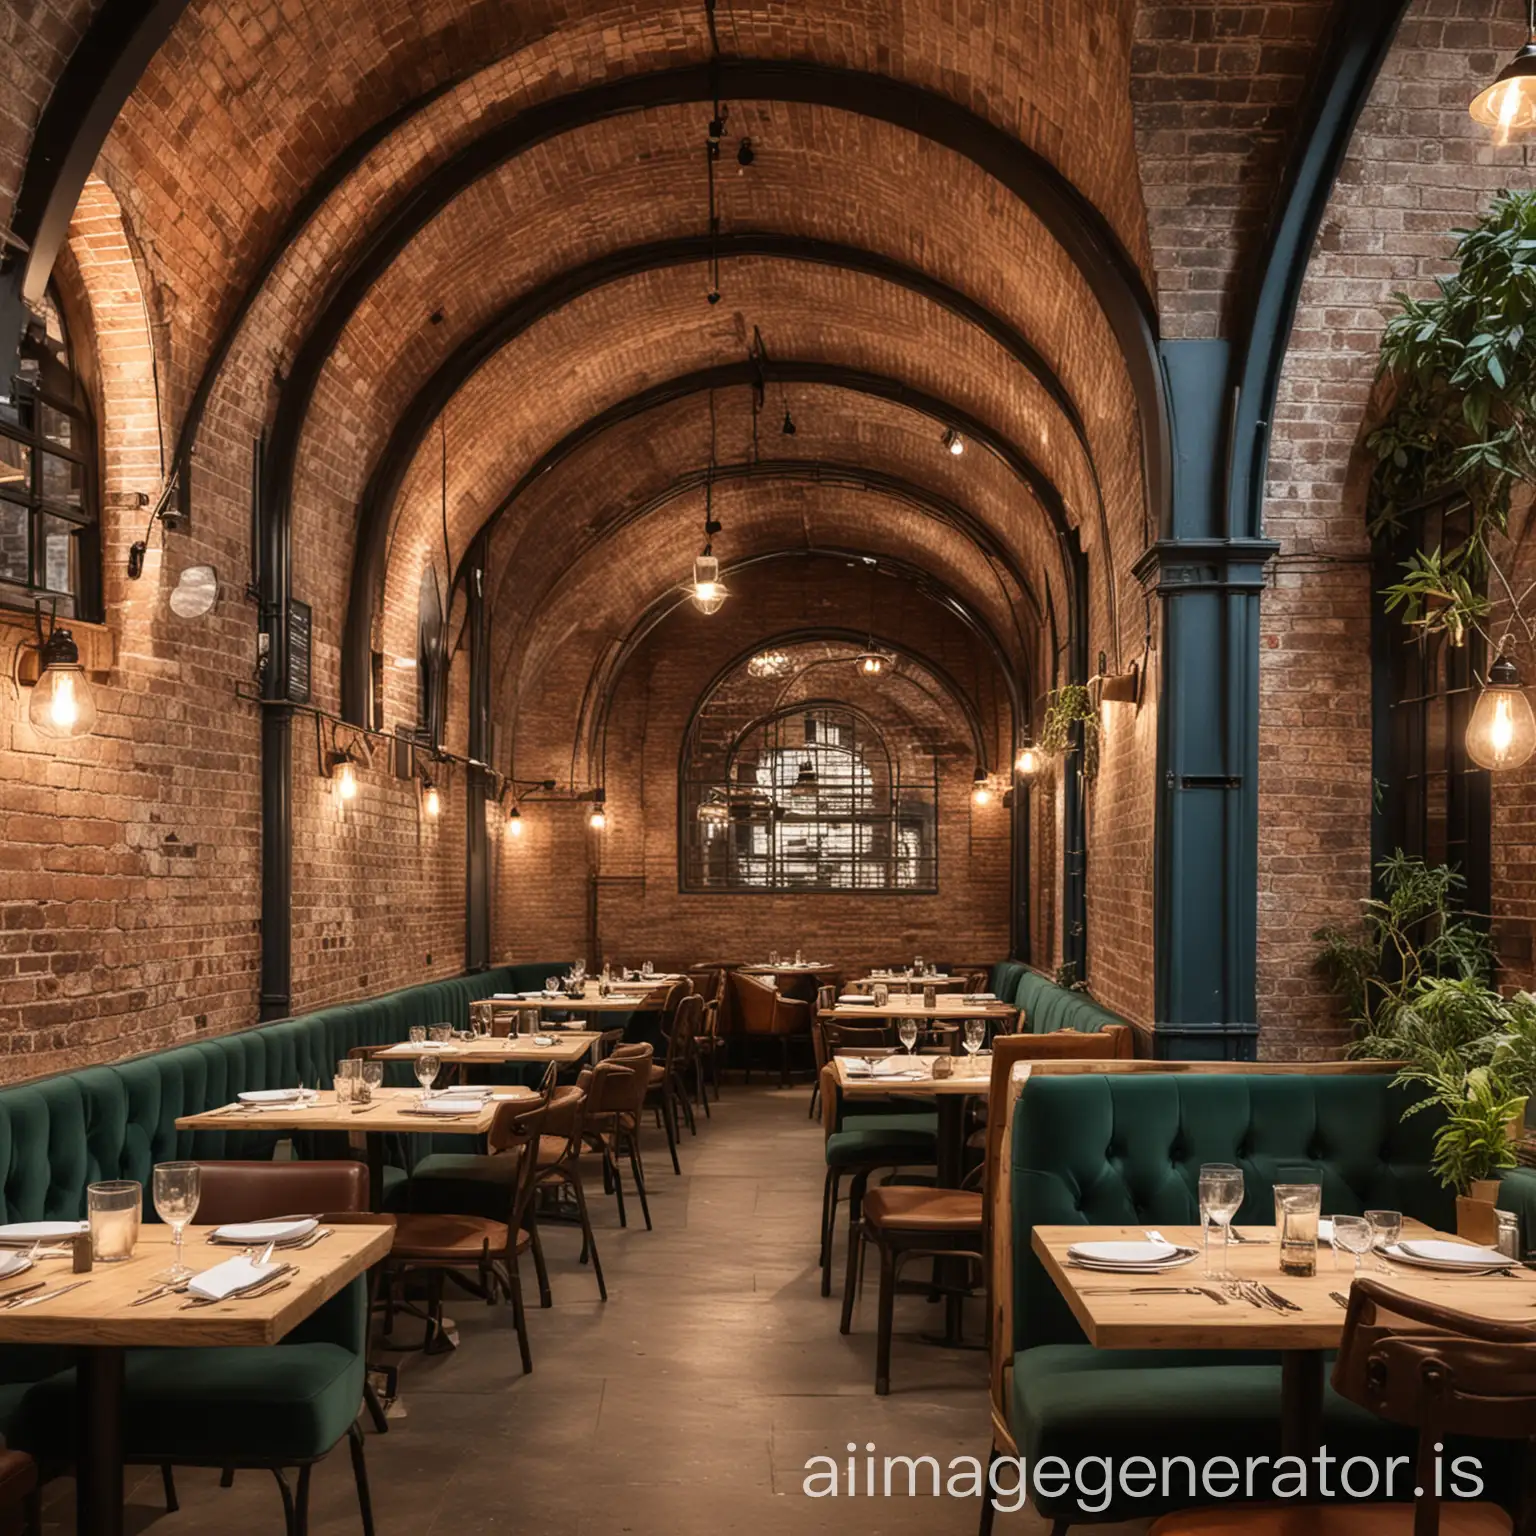 Create an interior design of a trendy, instagramable restaurant in London using current interior design trends and details in a railway arch setting